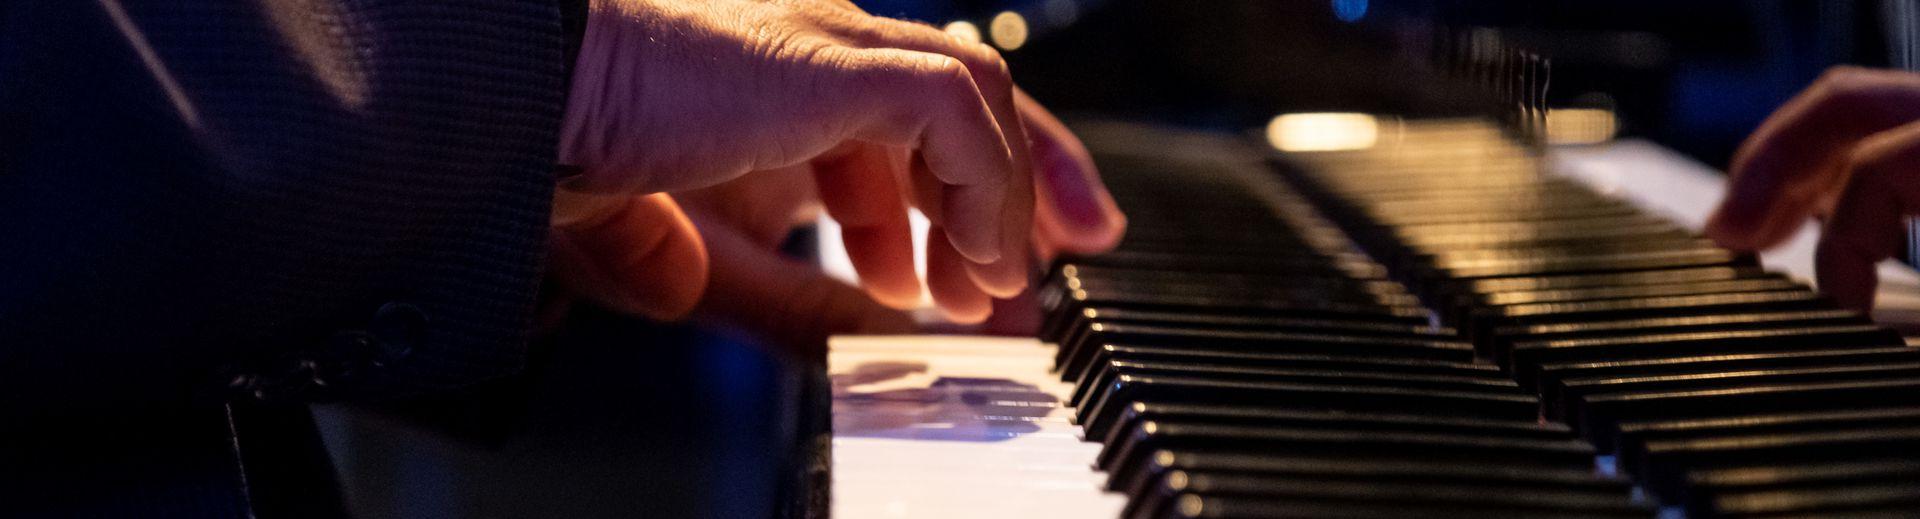 Hands of a pianist on a Steinway grand piano at a performance